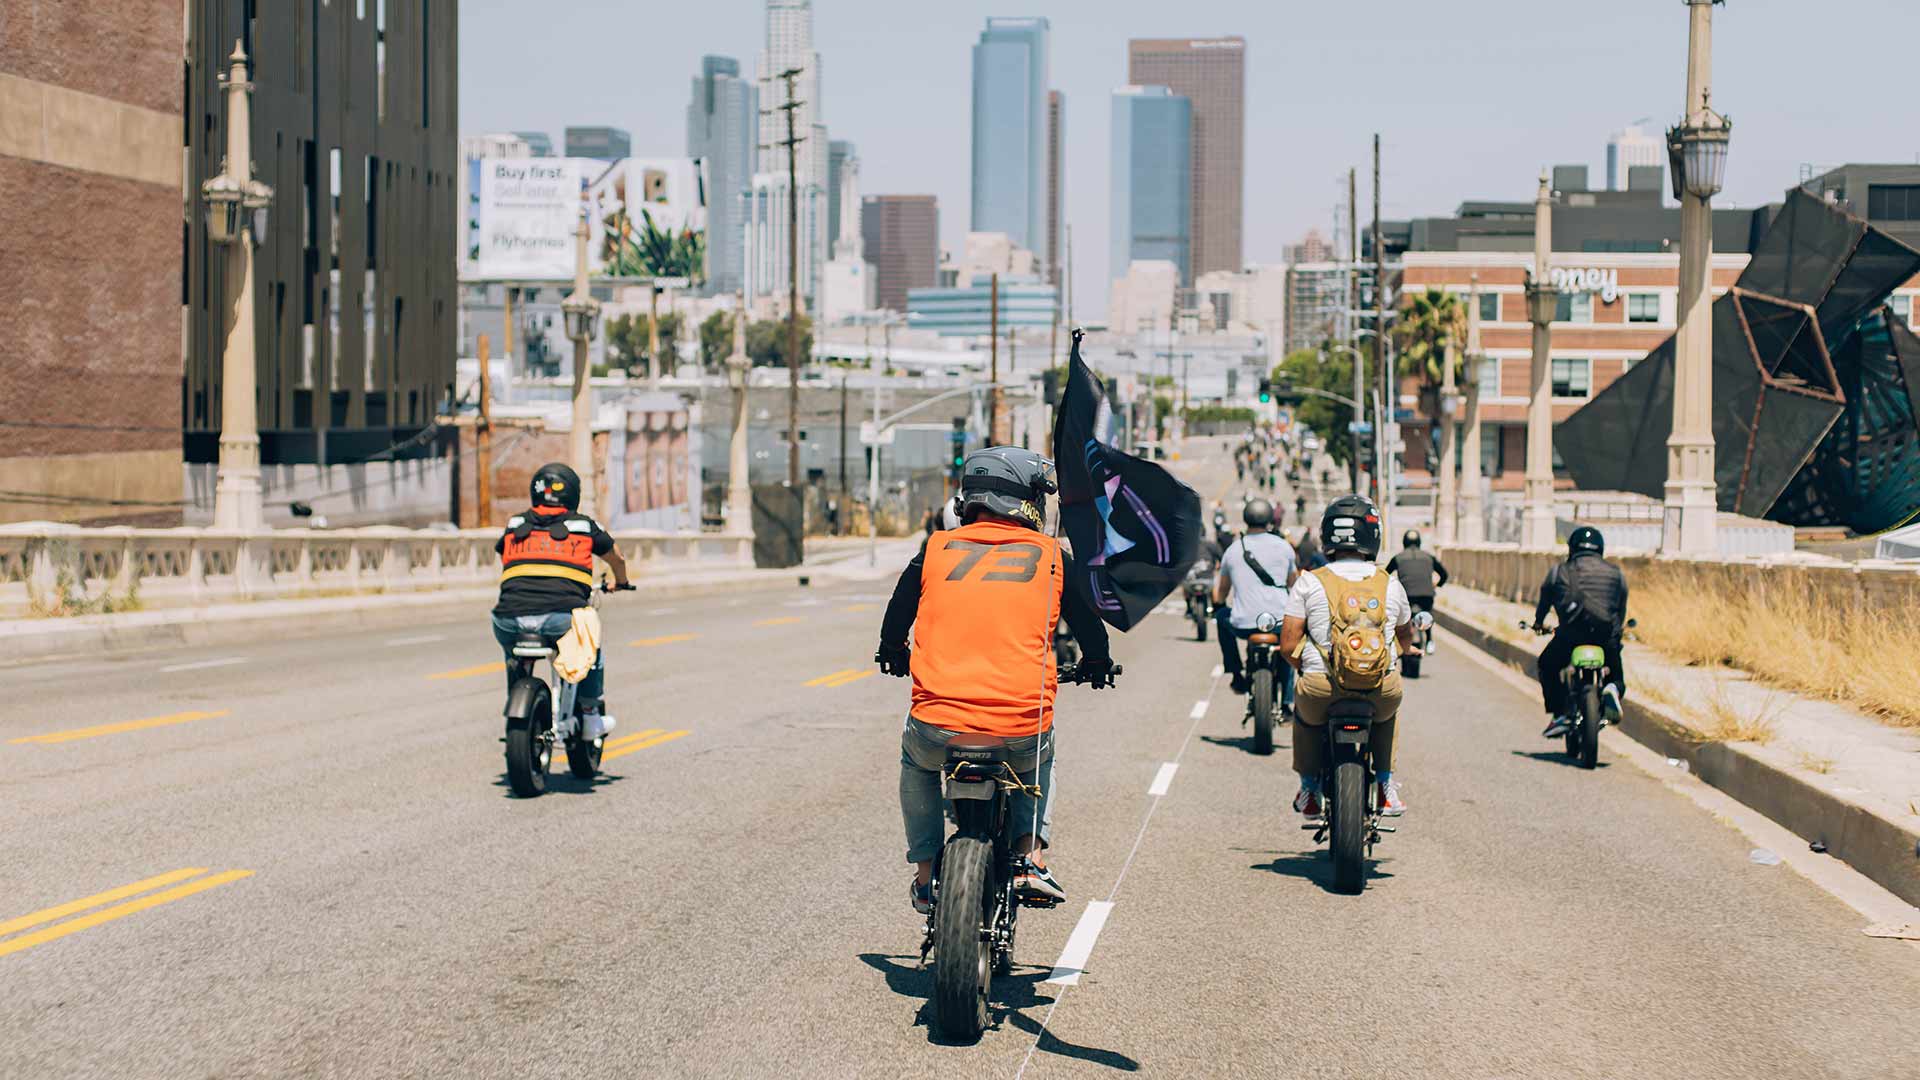 Super73 Group ride in downtown Los Angeles